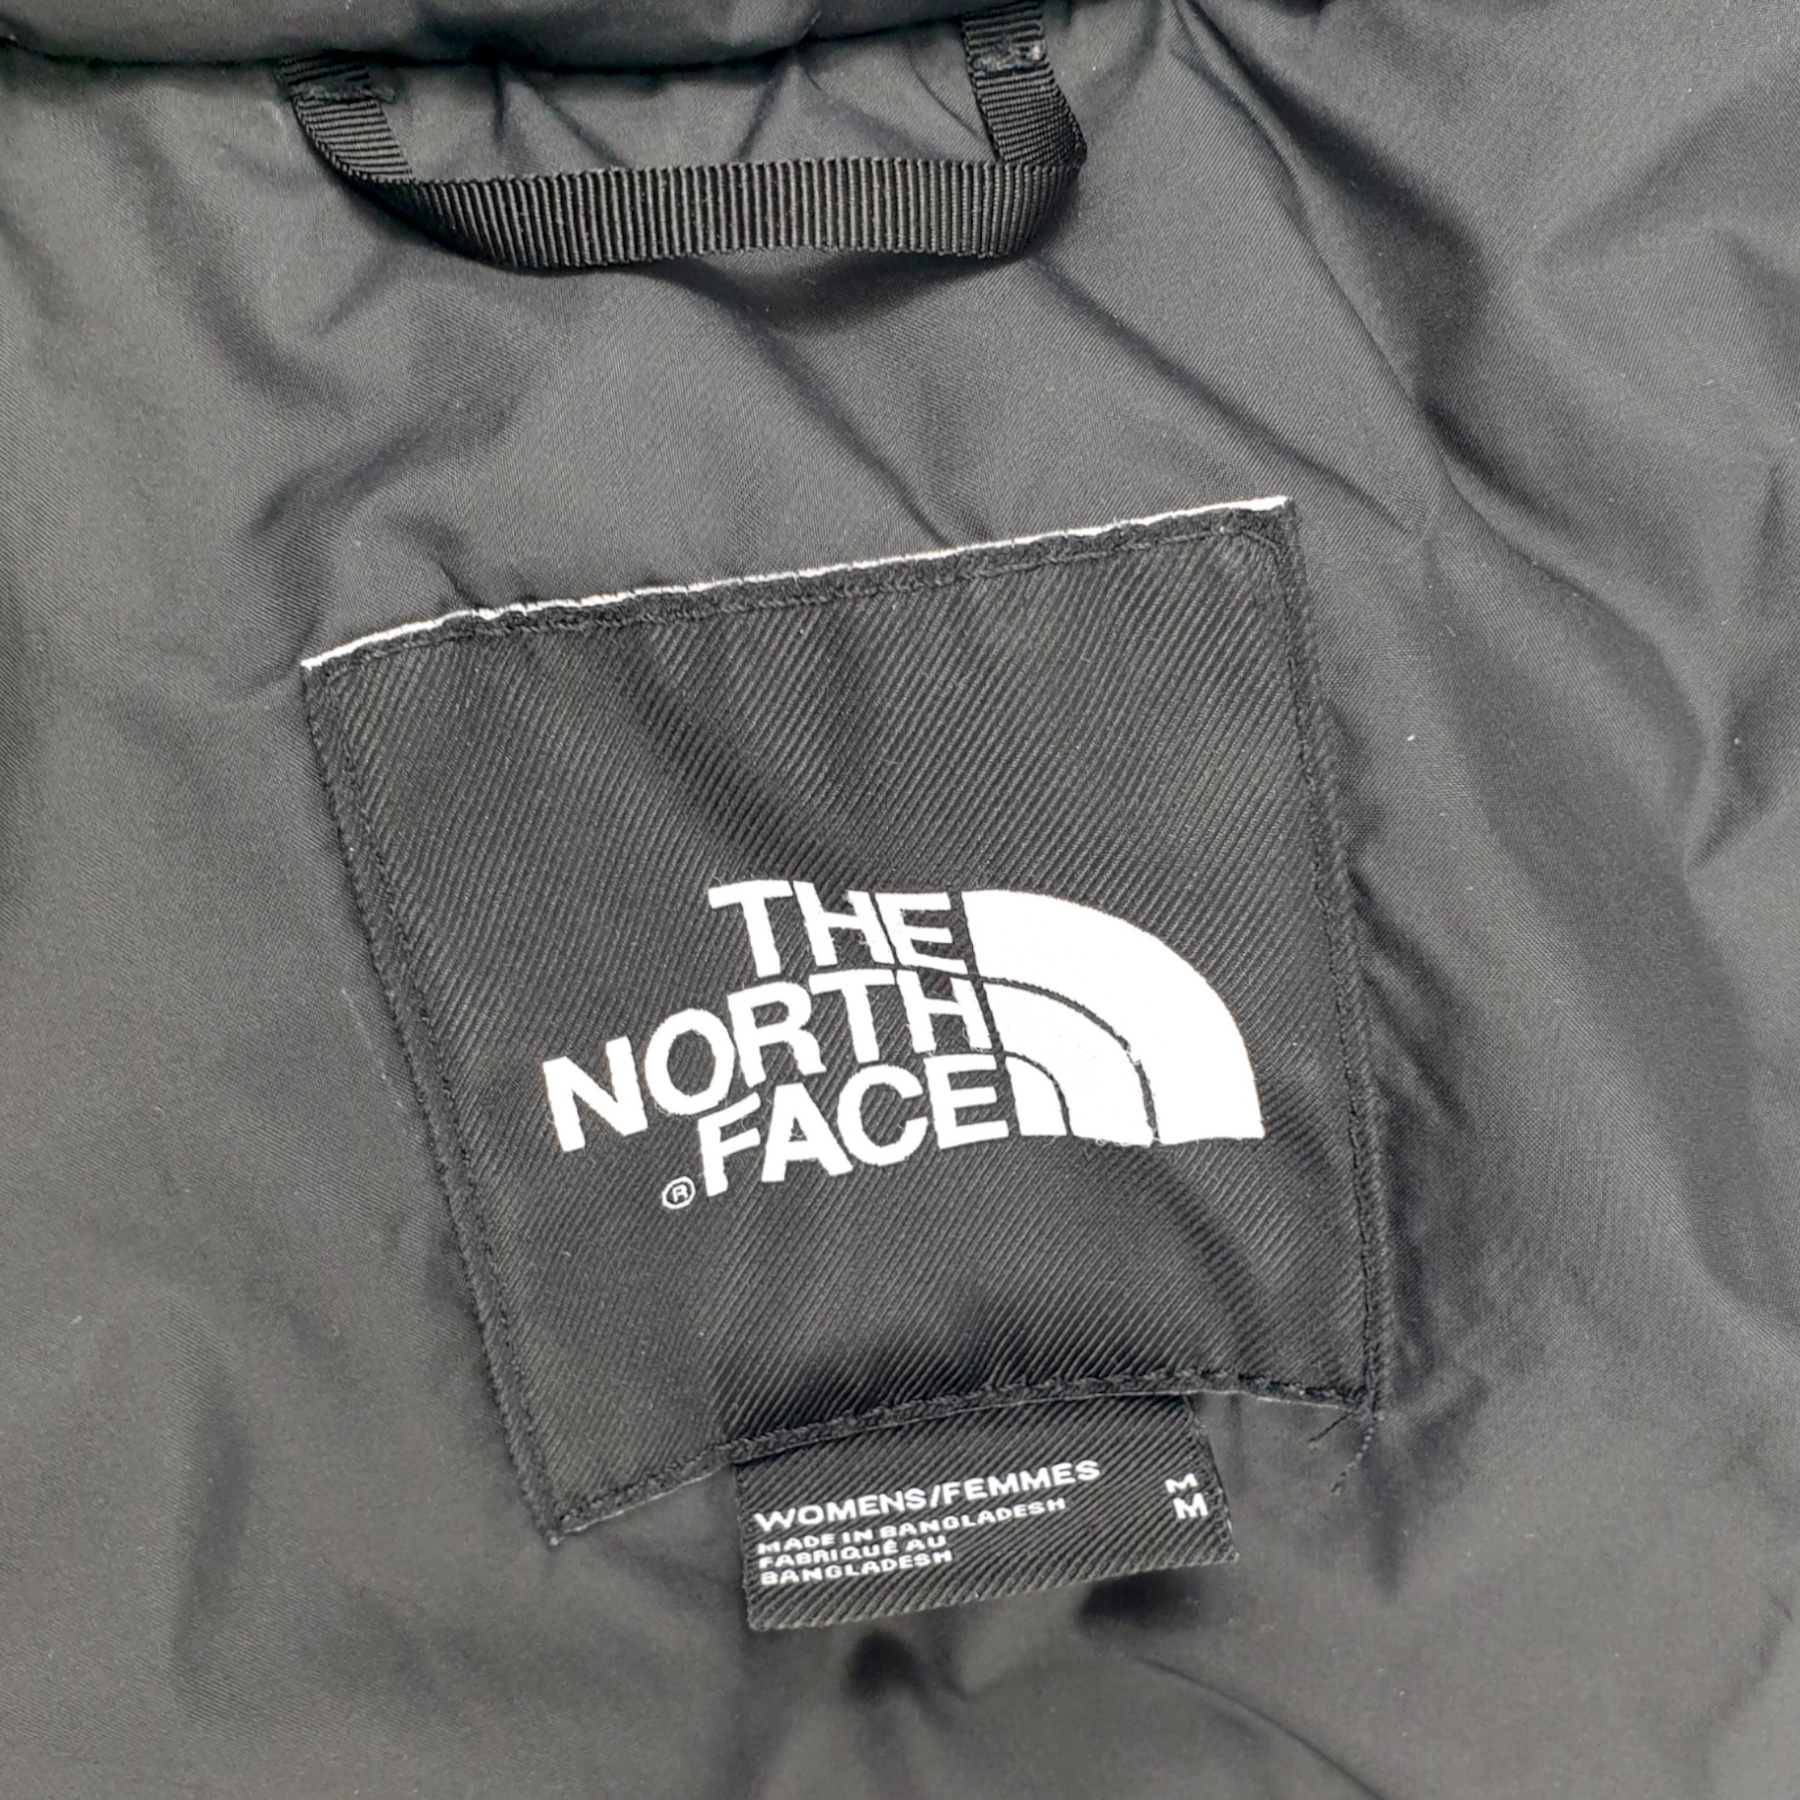 The North Face Black Puffer Jacket Shop from Crisis Online